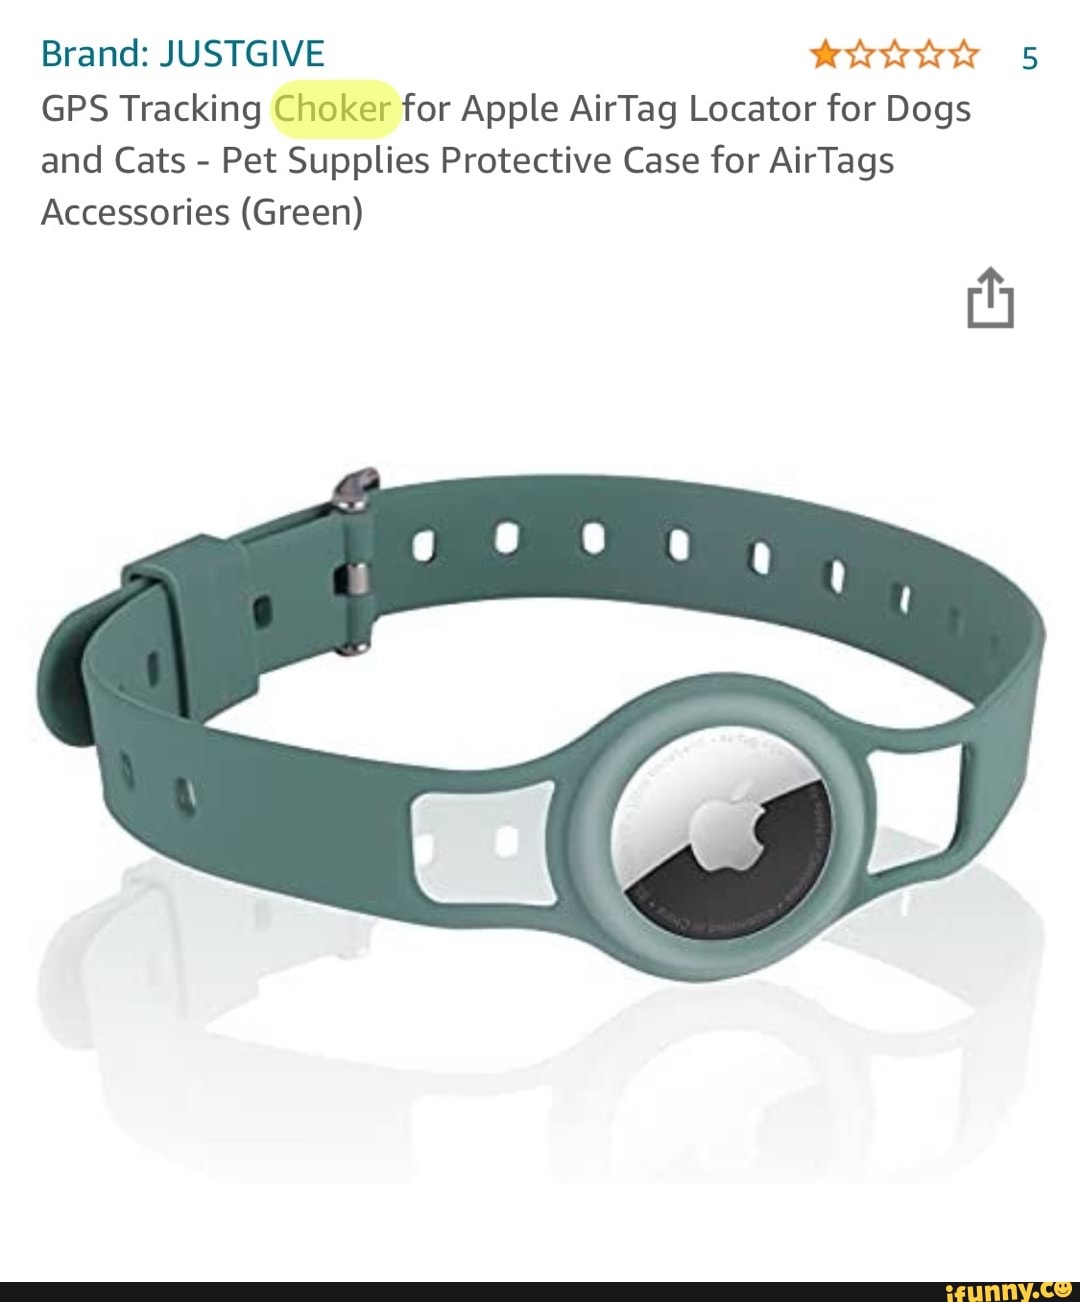 Pet Supplies Protective Case for AirTags Accessories GPS Tracking Choker for Apple AirTag Locator for Dogs and Cats Green